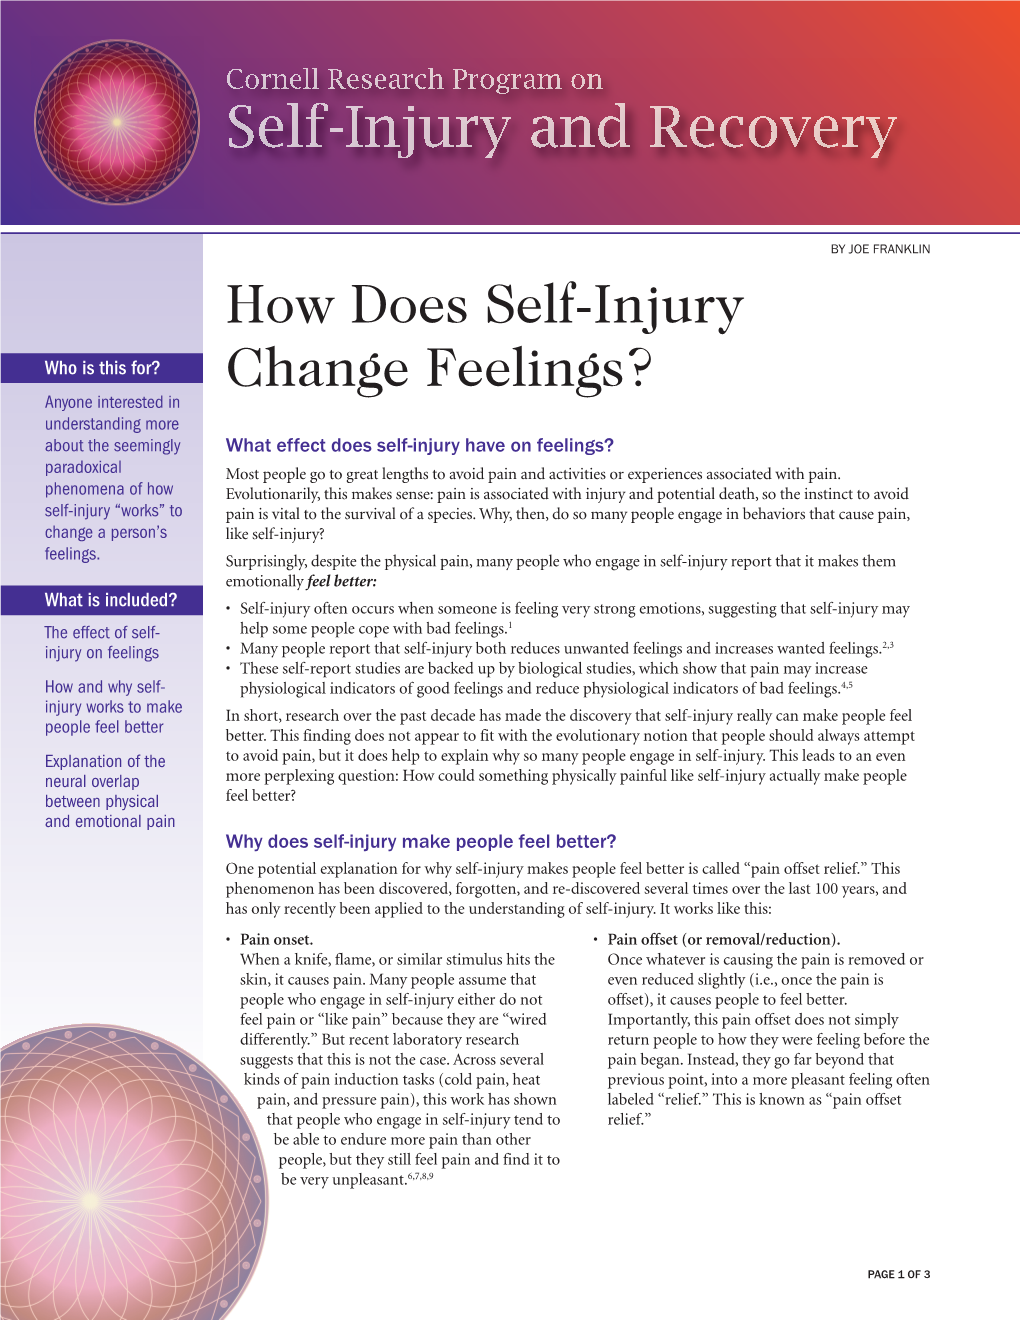 How Does Self-Injury Change Feelings? the Fact Sheet Series, Cornell Research Program on Self-Injury and Recovery